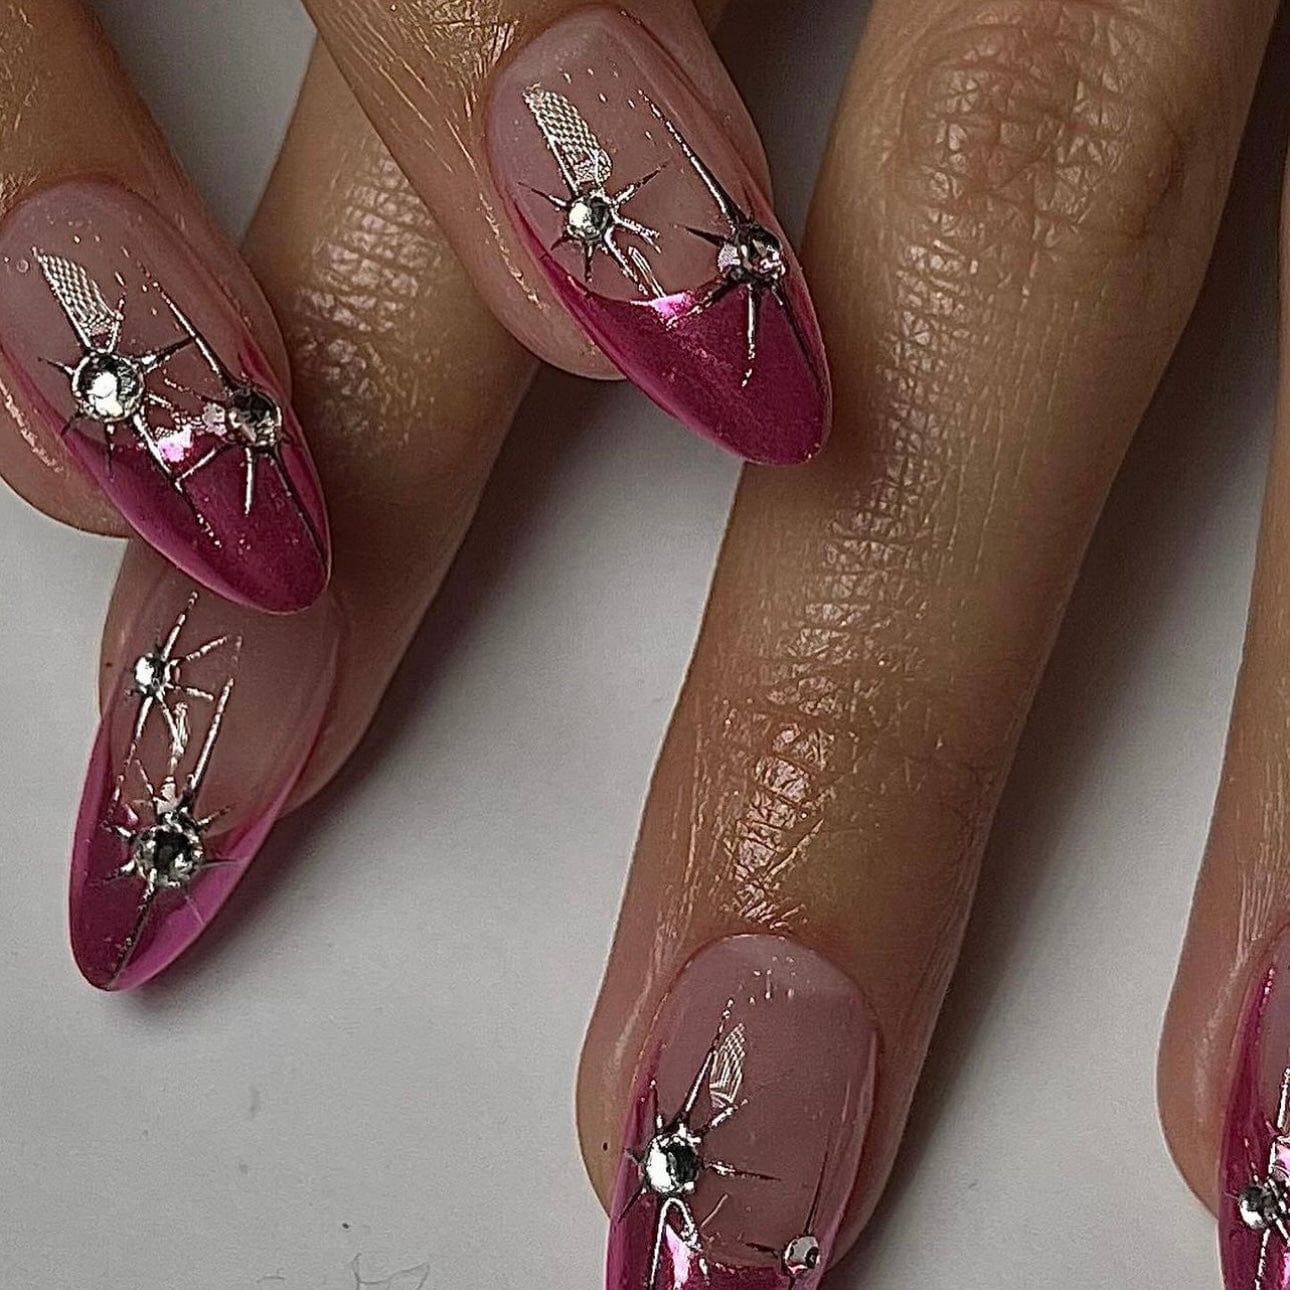 chrome french manicure